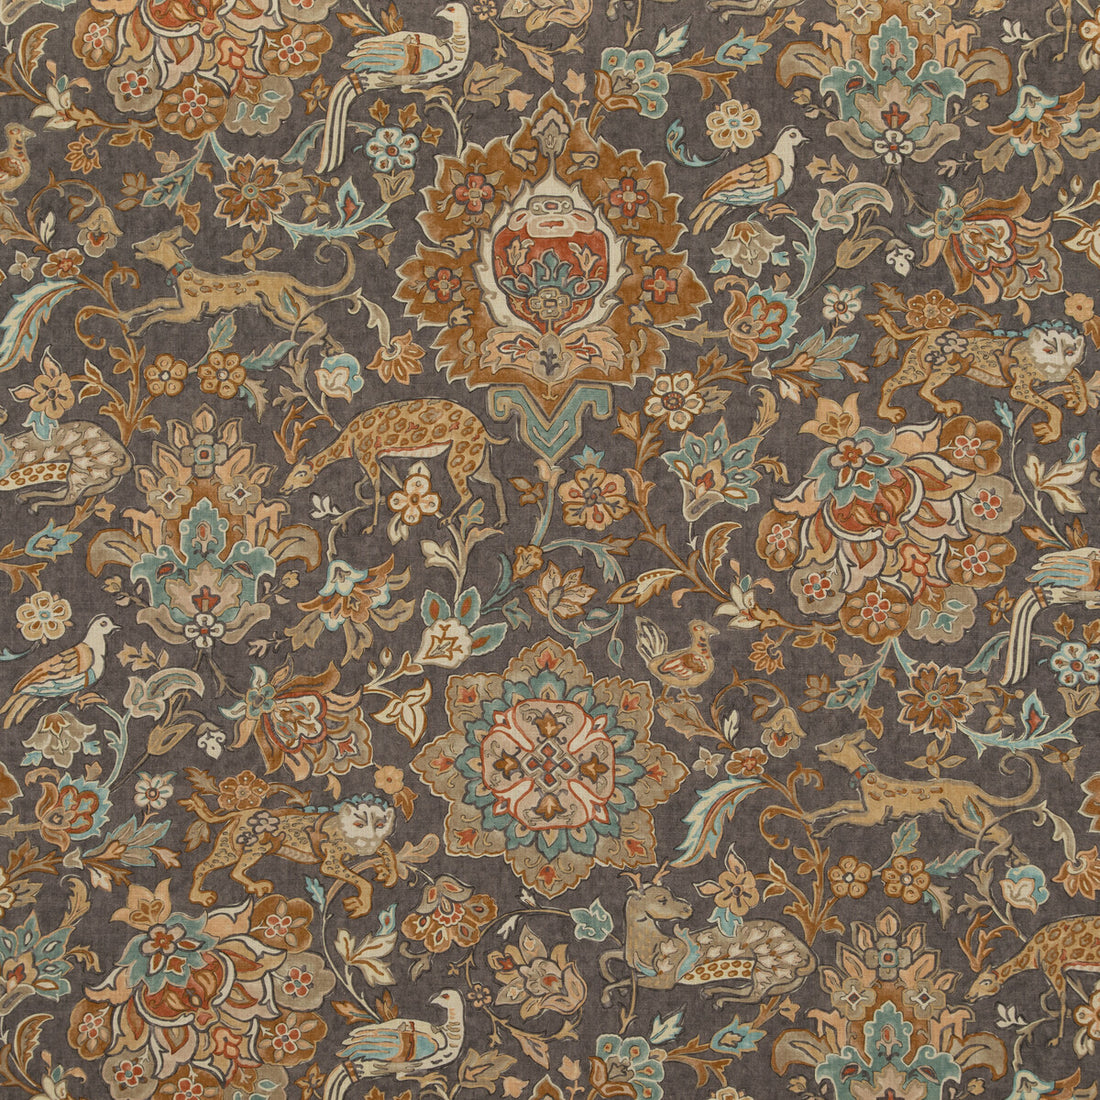 Wild Things fabric in woodsmoke color - pattern FD2005.A15.0 - by Mulberry in the Mulberry Long Weekend collection